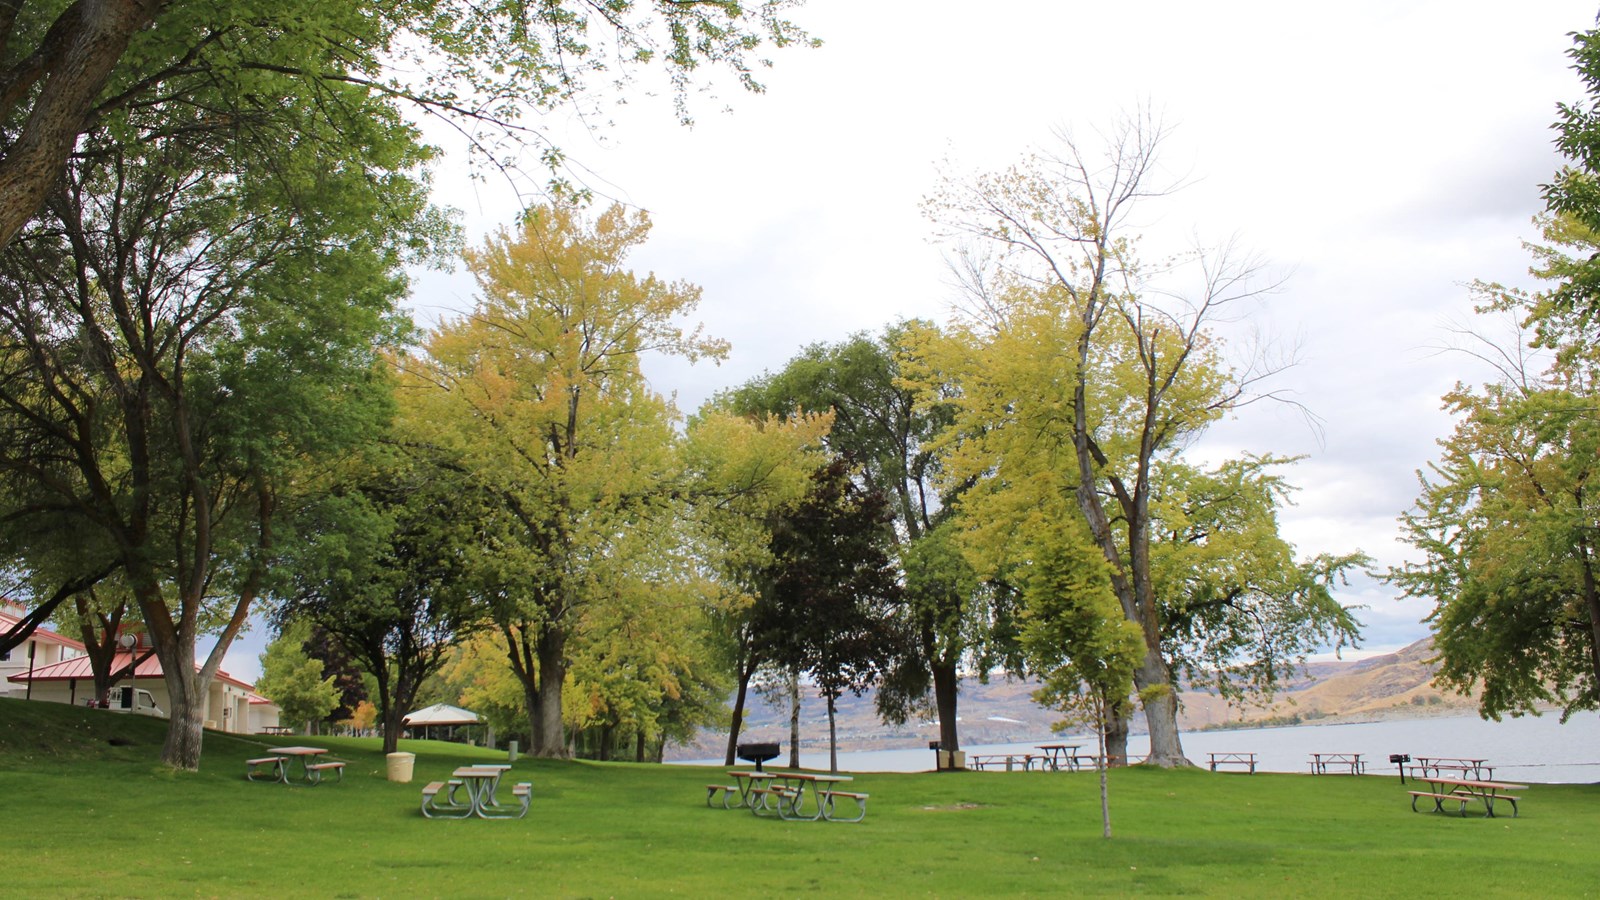 A large grassy area adjacent to the lakeshore has picnic tables, grills, and a large picnic shelter.